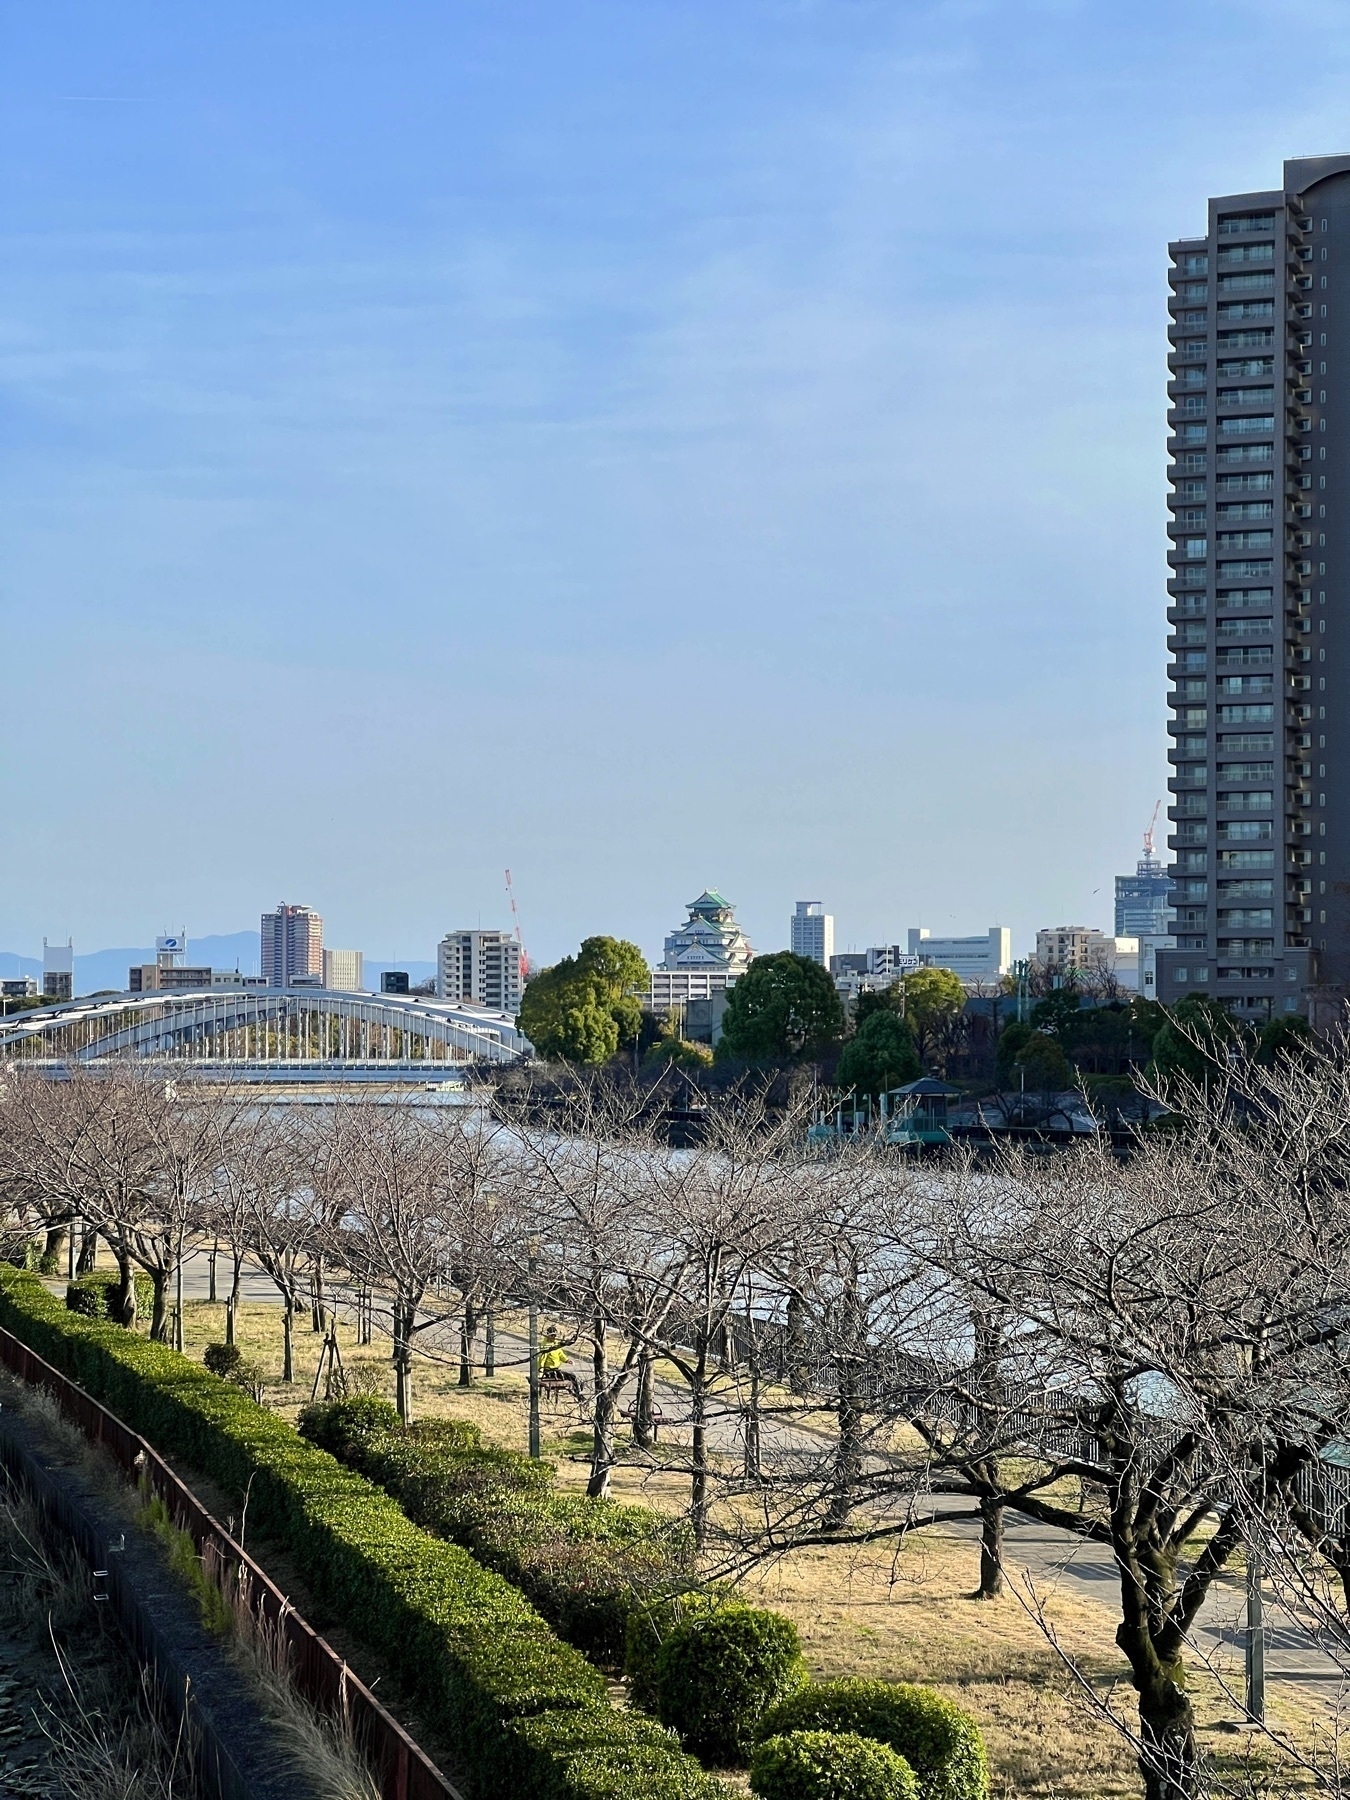 Photo from a bridge going over a river. Below are trees lining the river bank. They are bare with no leaves or blossoms…  yet. In the far distance is Osaka Castle